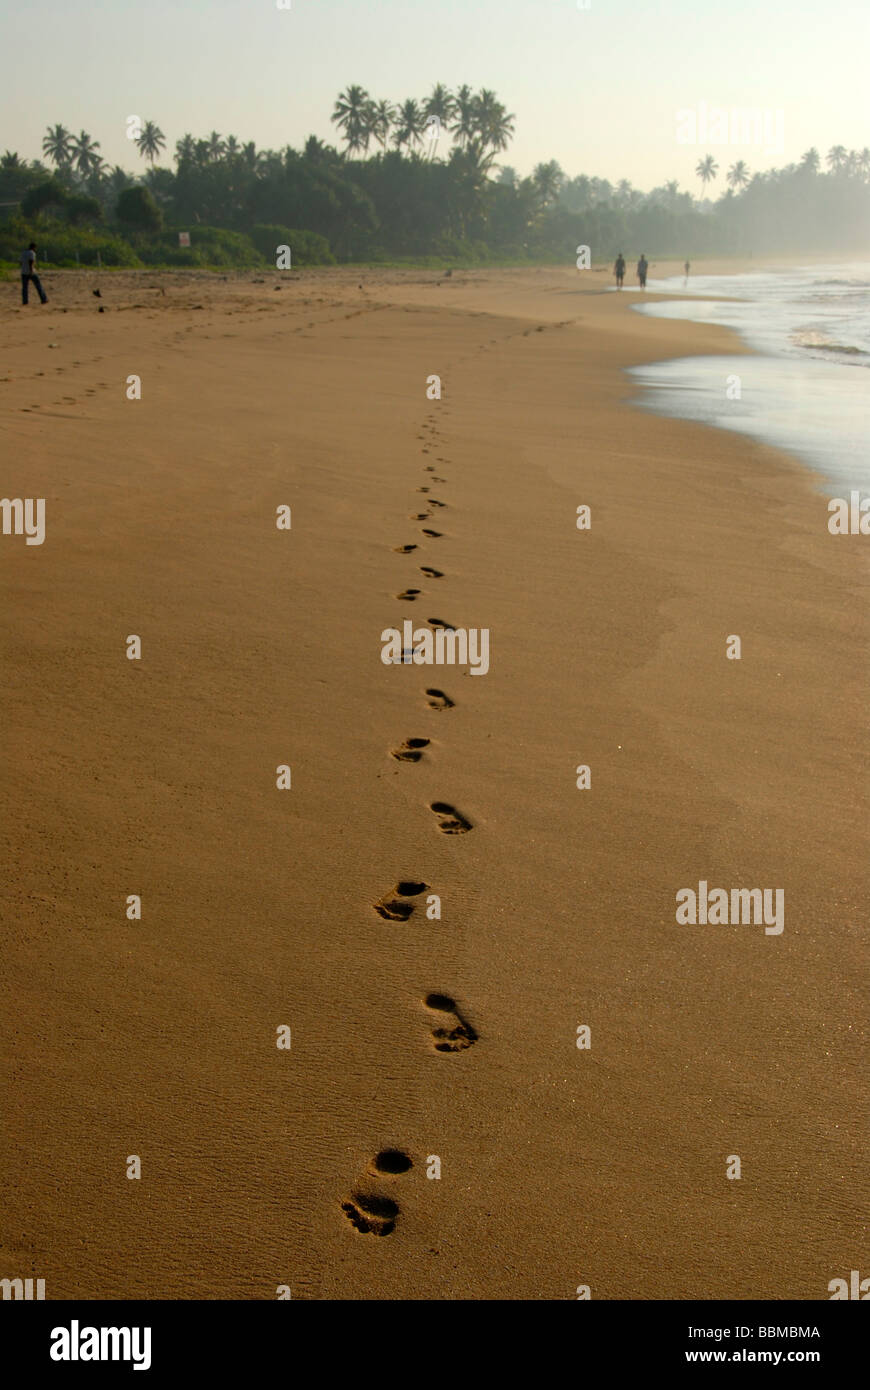 Foot prints in the sand, barefoot, straight line, trail in the sand, Talalla Beach, Indian Ocean, Ceylon, Sri Lanka, South Asia Stock Photo